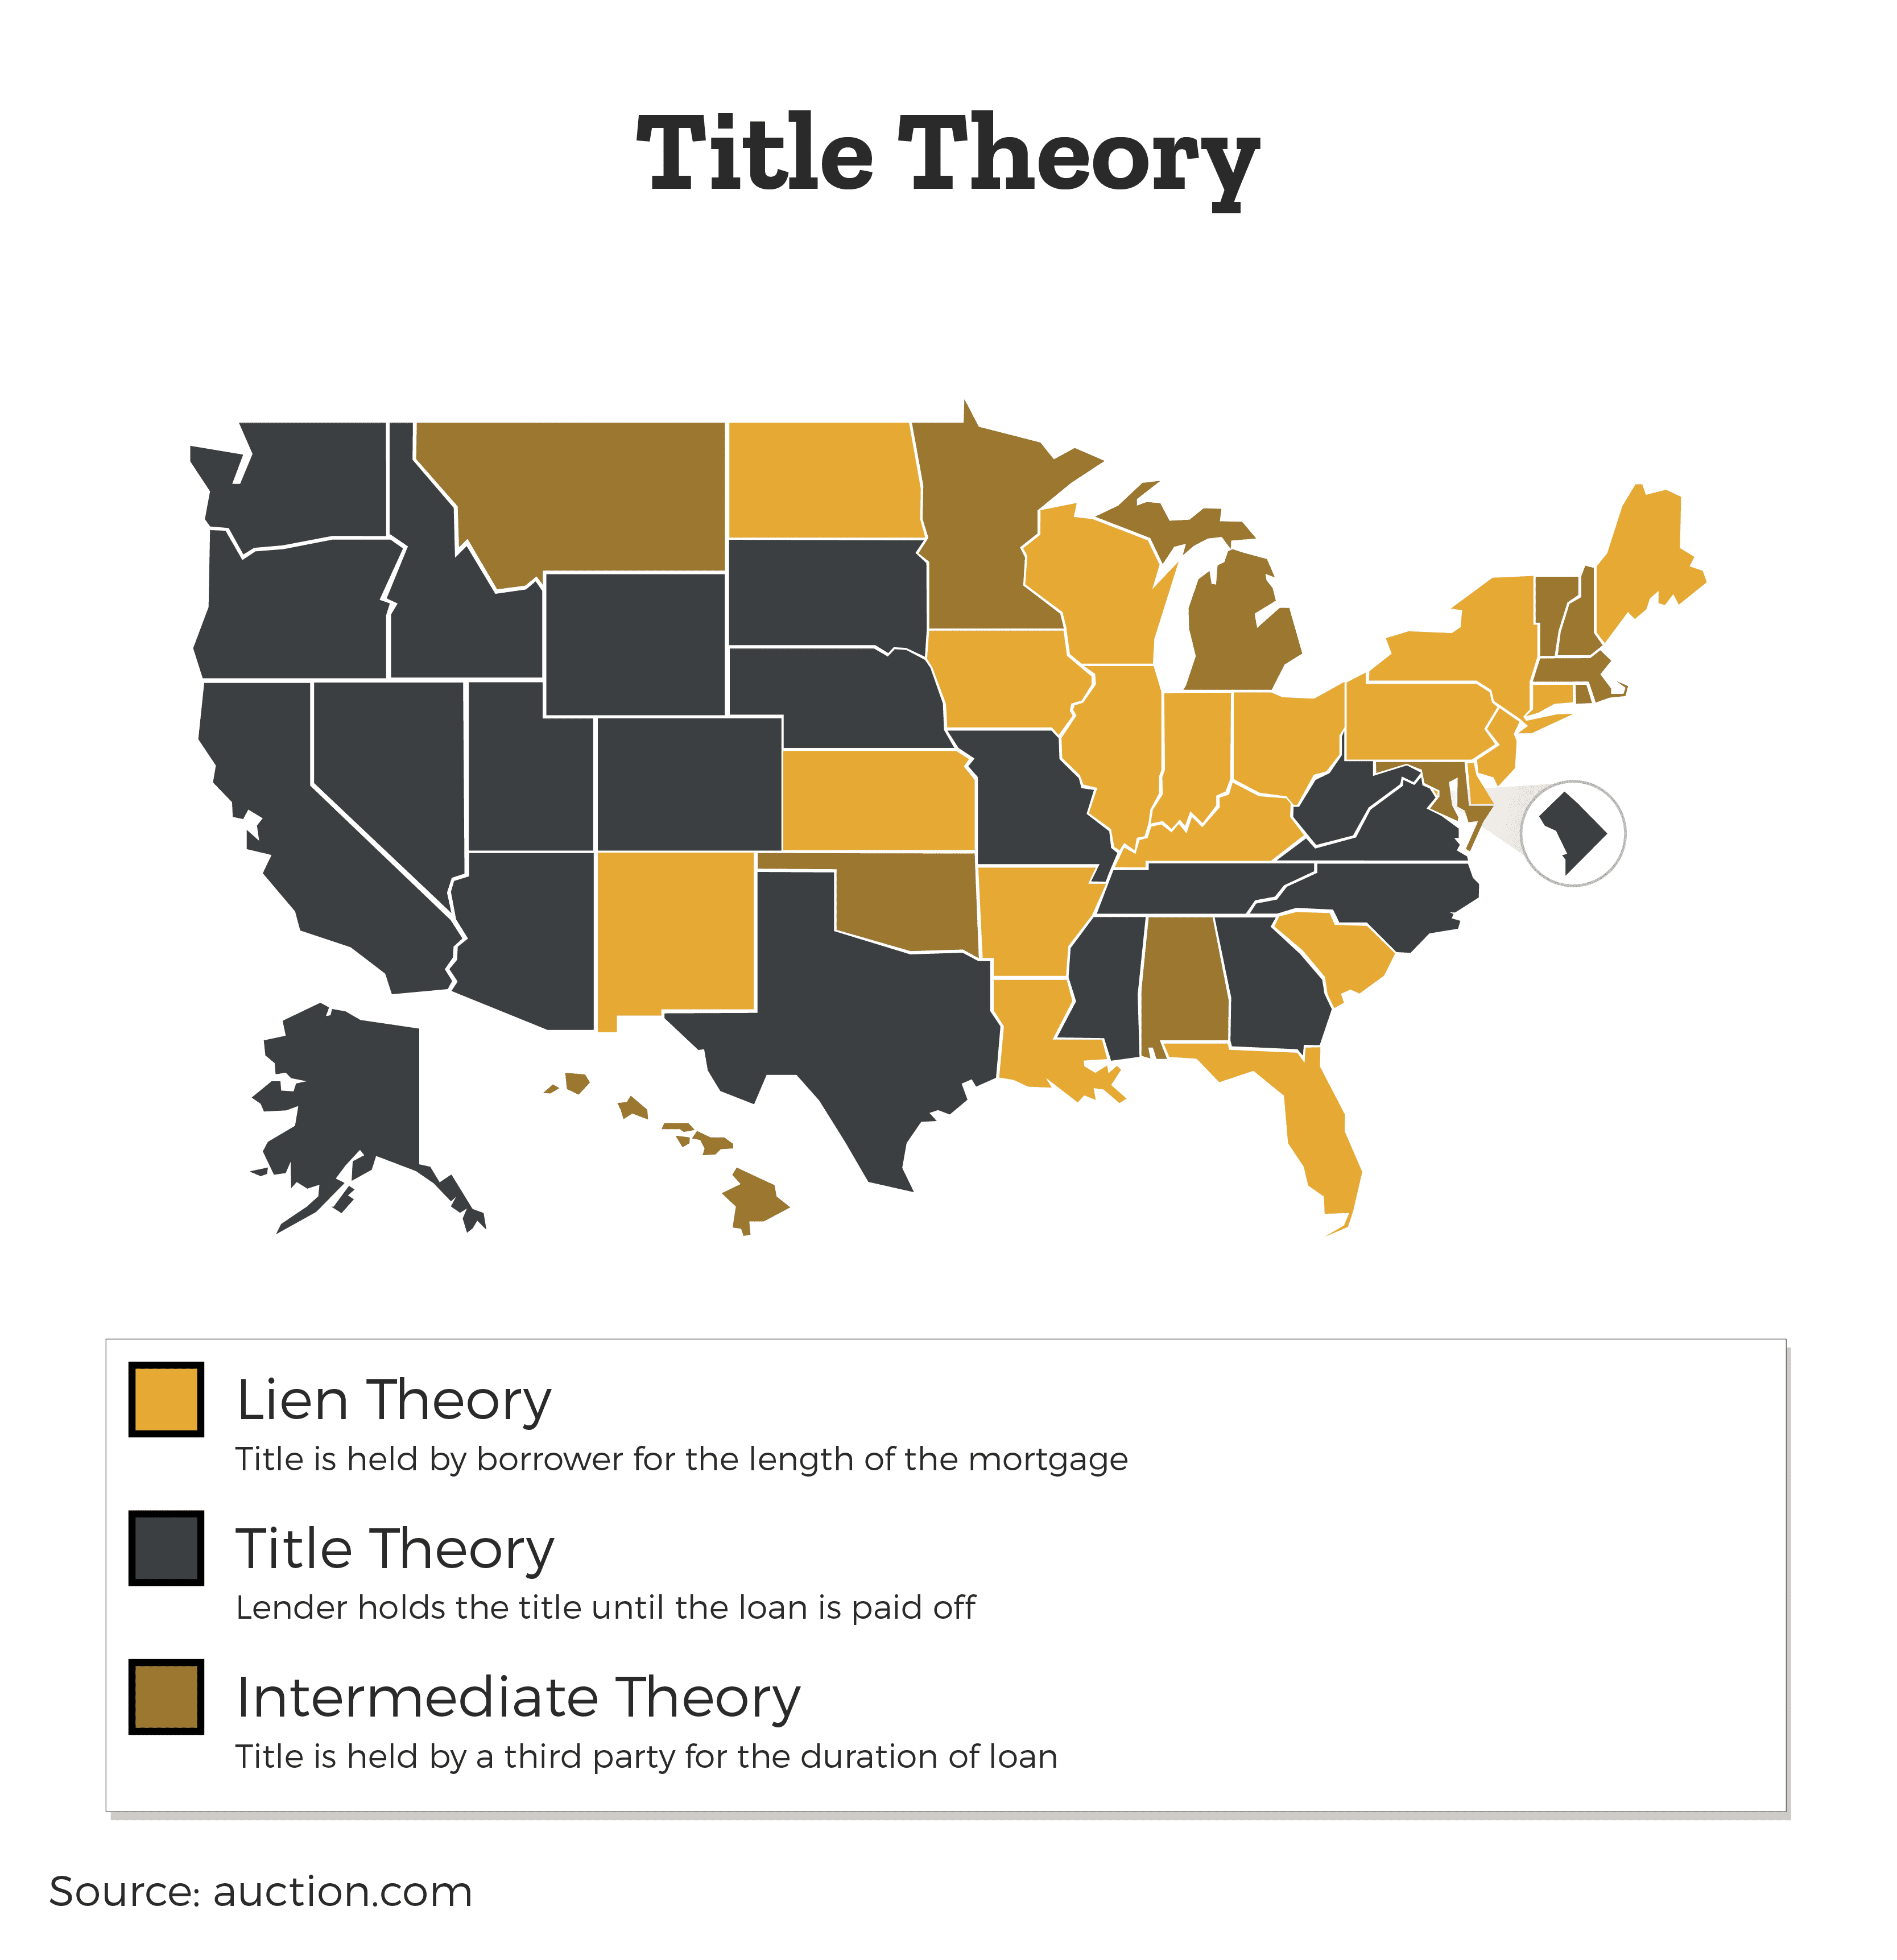 State by State Map of Title Theory Laws - colored coded based on the practice of Lien Theory, Title Theory, and Intermediate Theory. Lien theory is a title held by the borrower for the length of the mortgage. Title theory is when a lender holds the title until the loan is paid off. Intermediate theory is when a title is held by a third party for the duration of the loan. Florida is a Lien Theory state.